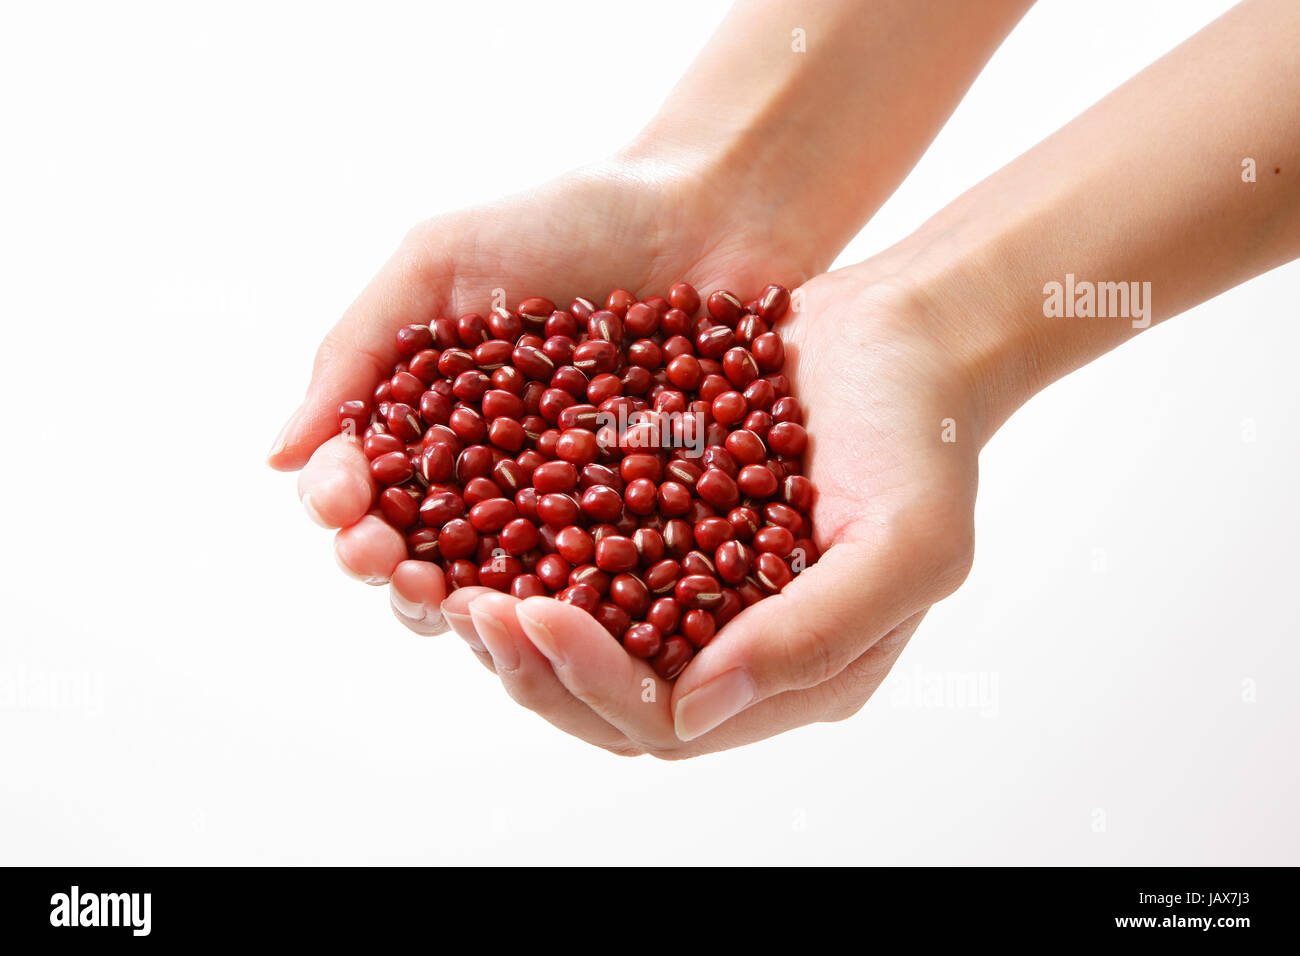 Red beans Stock Photo